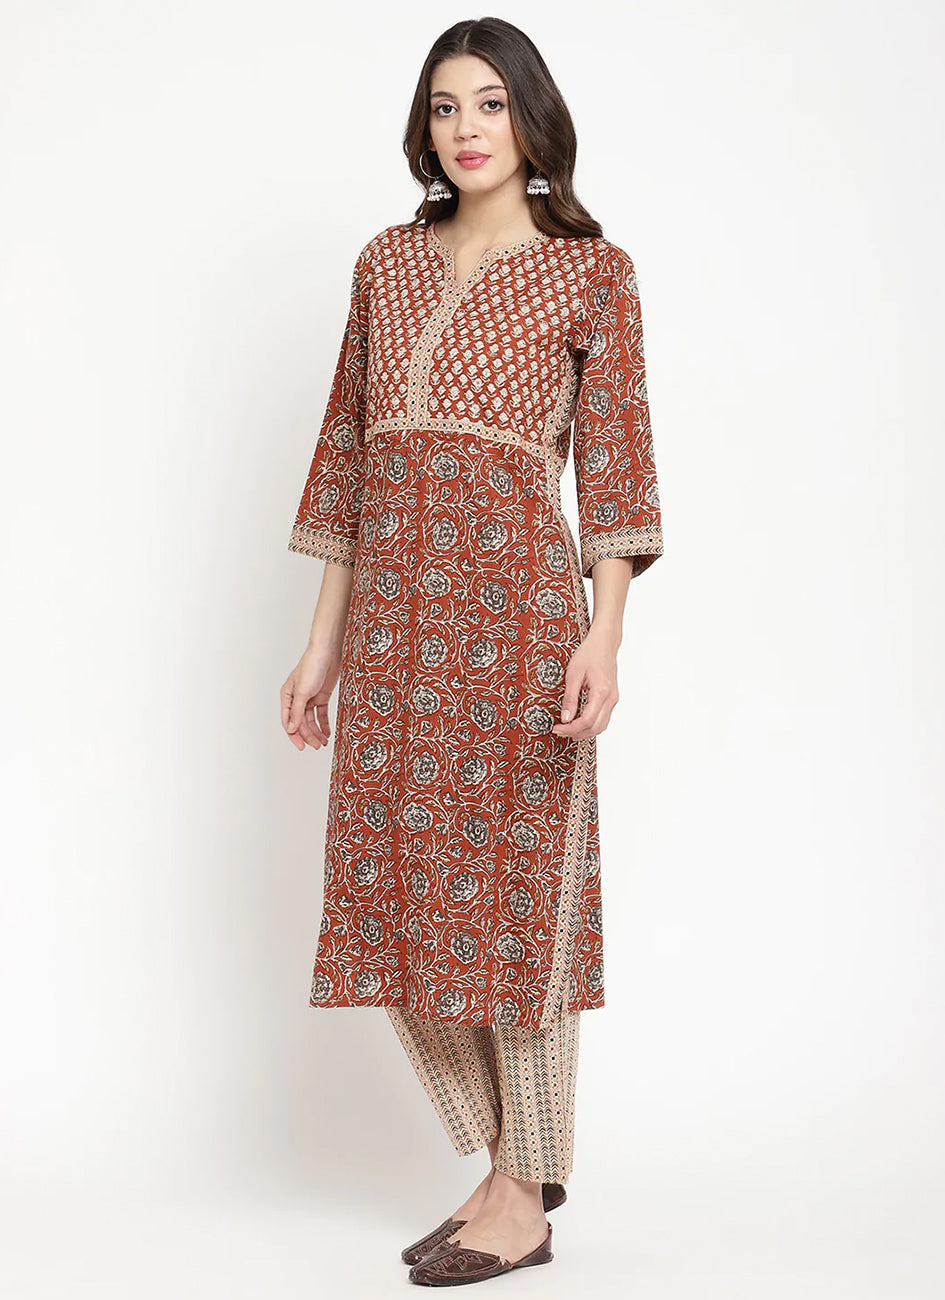 Block Print Outfits That Ace The Modern Ethnic Vibe